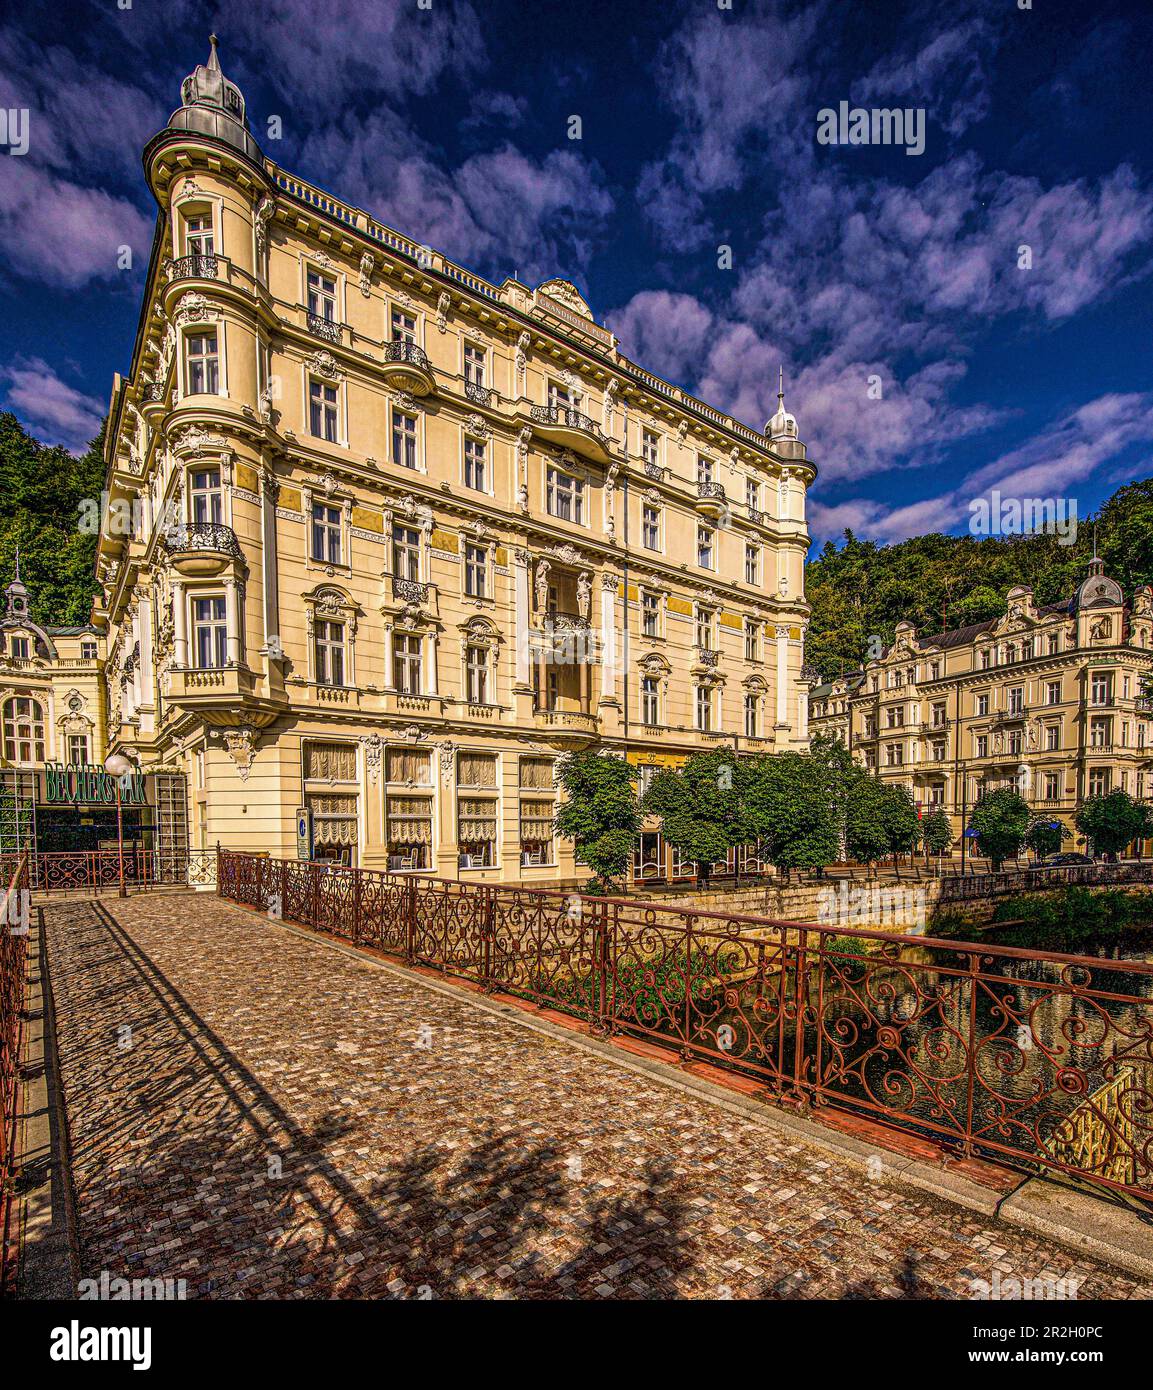 Grandhotel Pupp (1905-1907) on the banks of the River Tepl (Tepla) in the morning light, Karlovy Vary, Karlovy Vary, Czech Republic Stock Photo